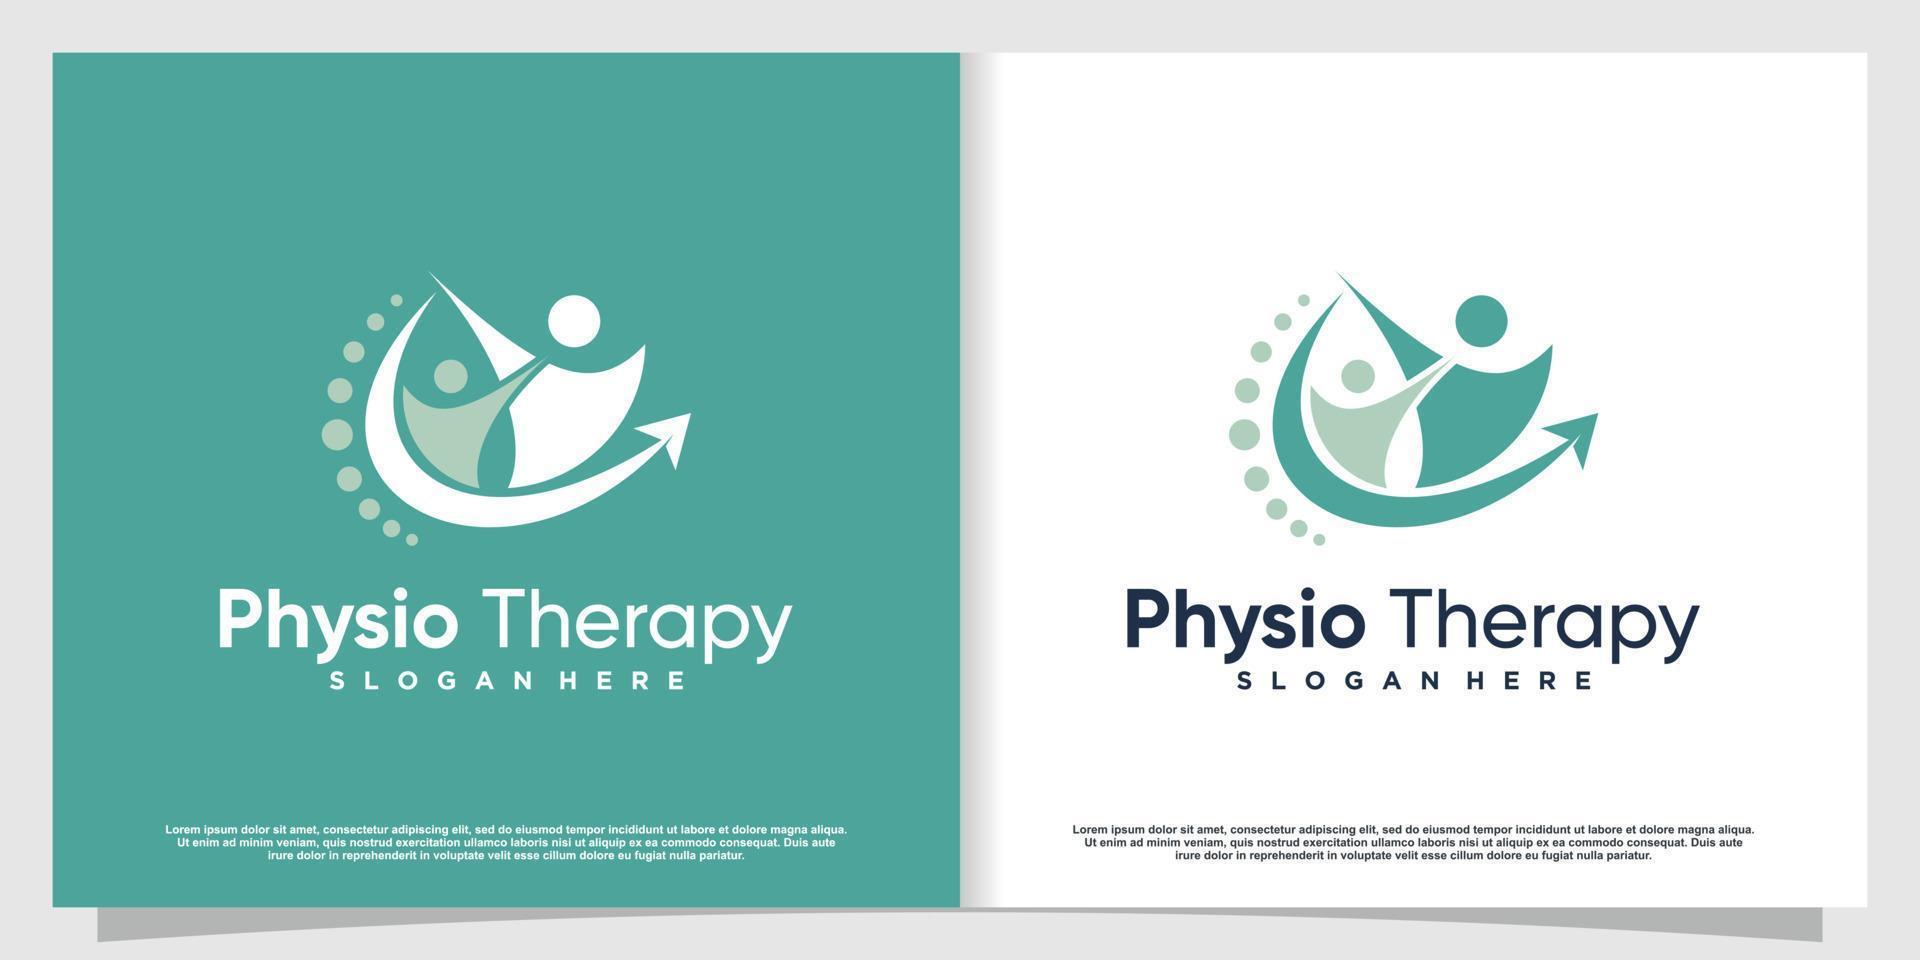 Chiropractic logo for massage and business with creative element concept Premium Vector